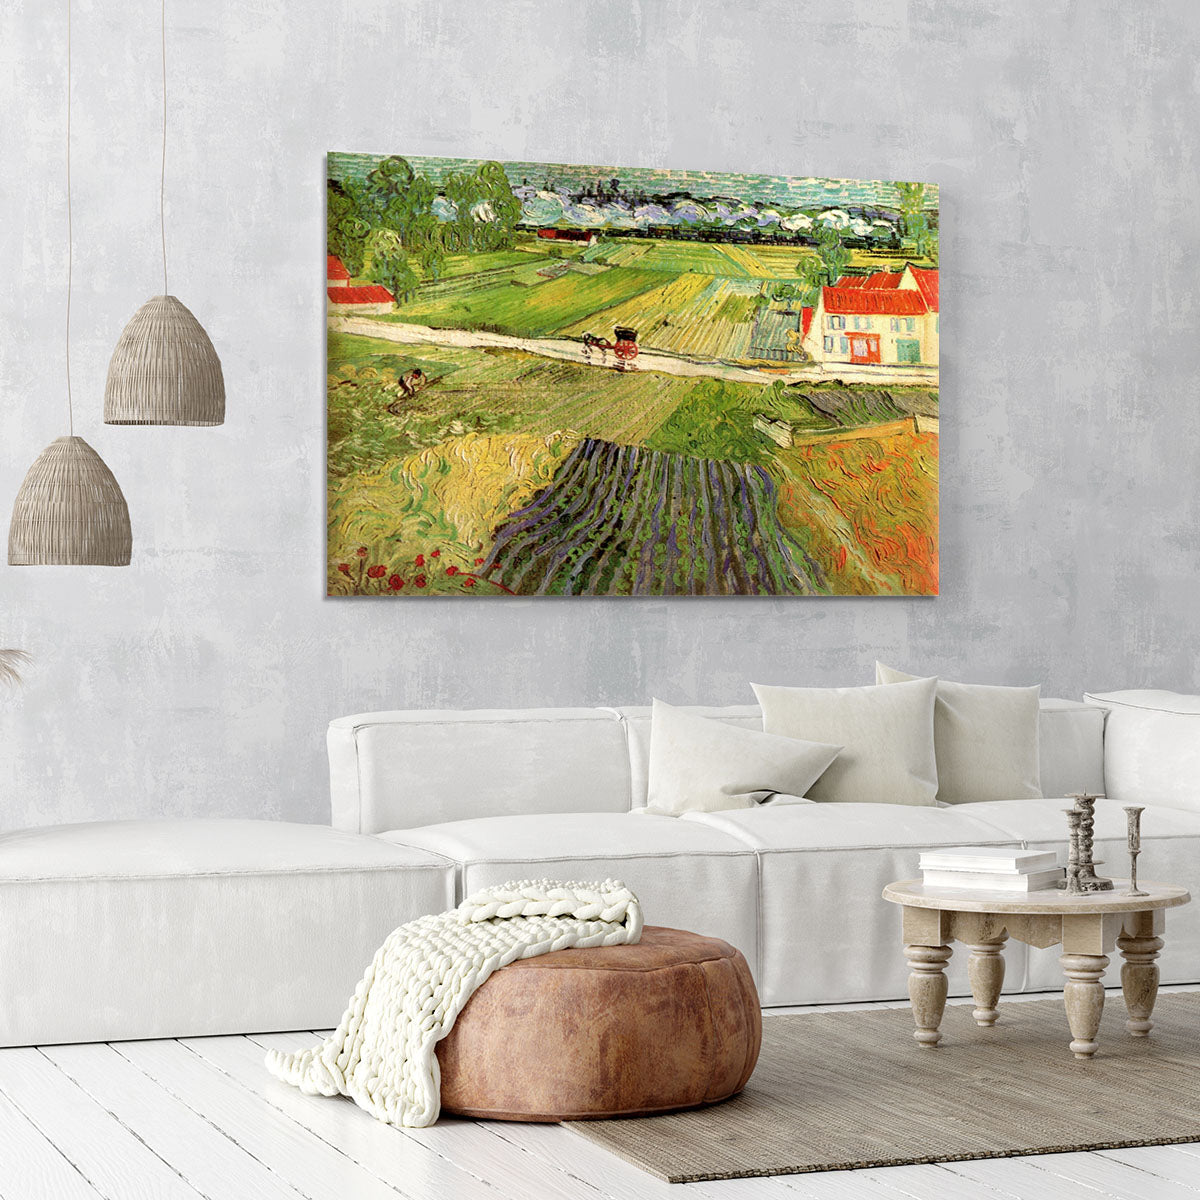 Landscape with Carriage and Train in the Background by Van Gogh Canvas Print or Poster - Canvas Art Rocks - 6